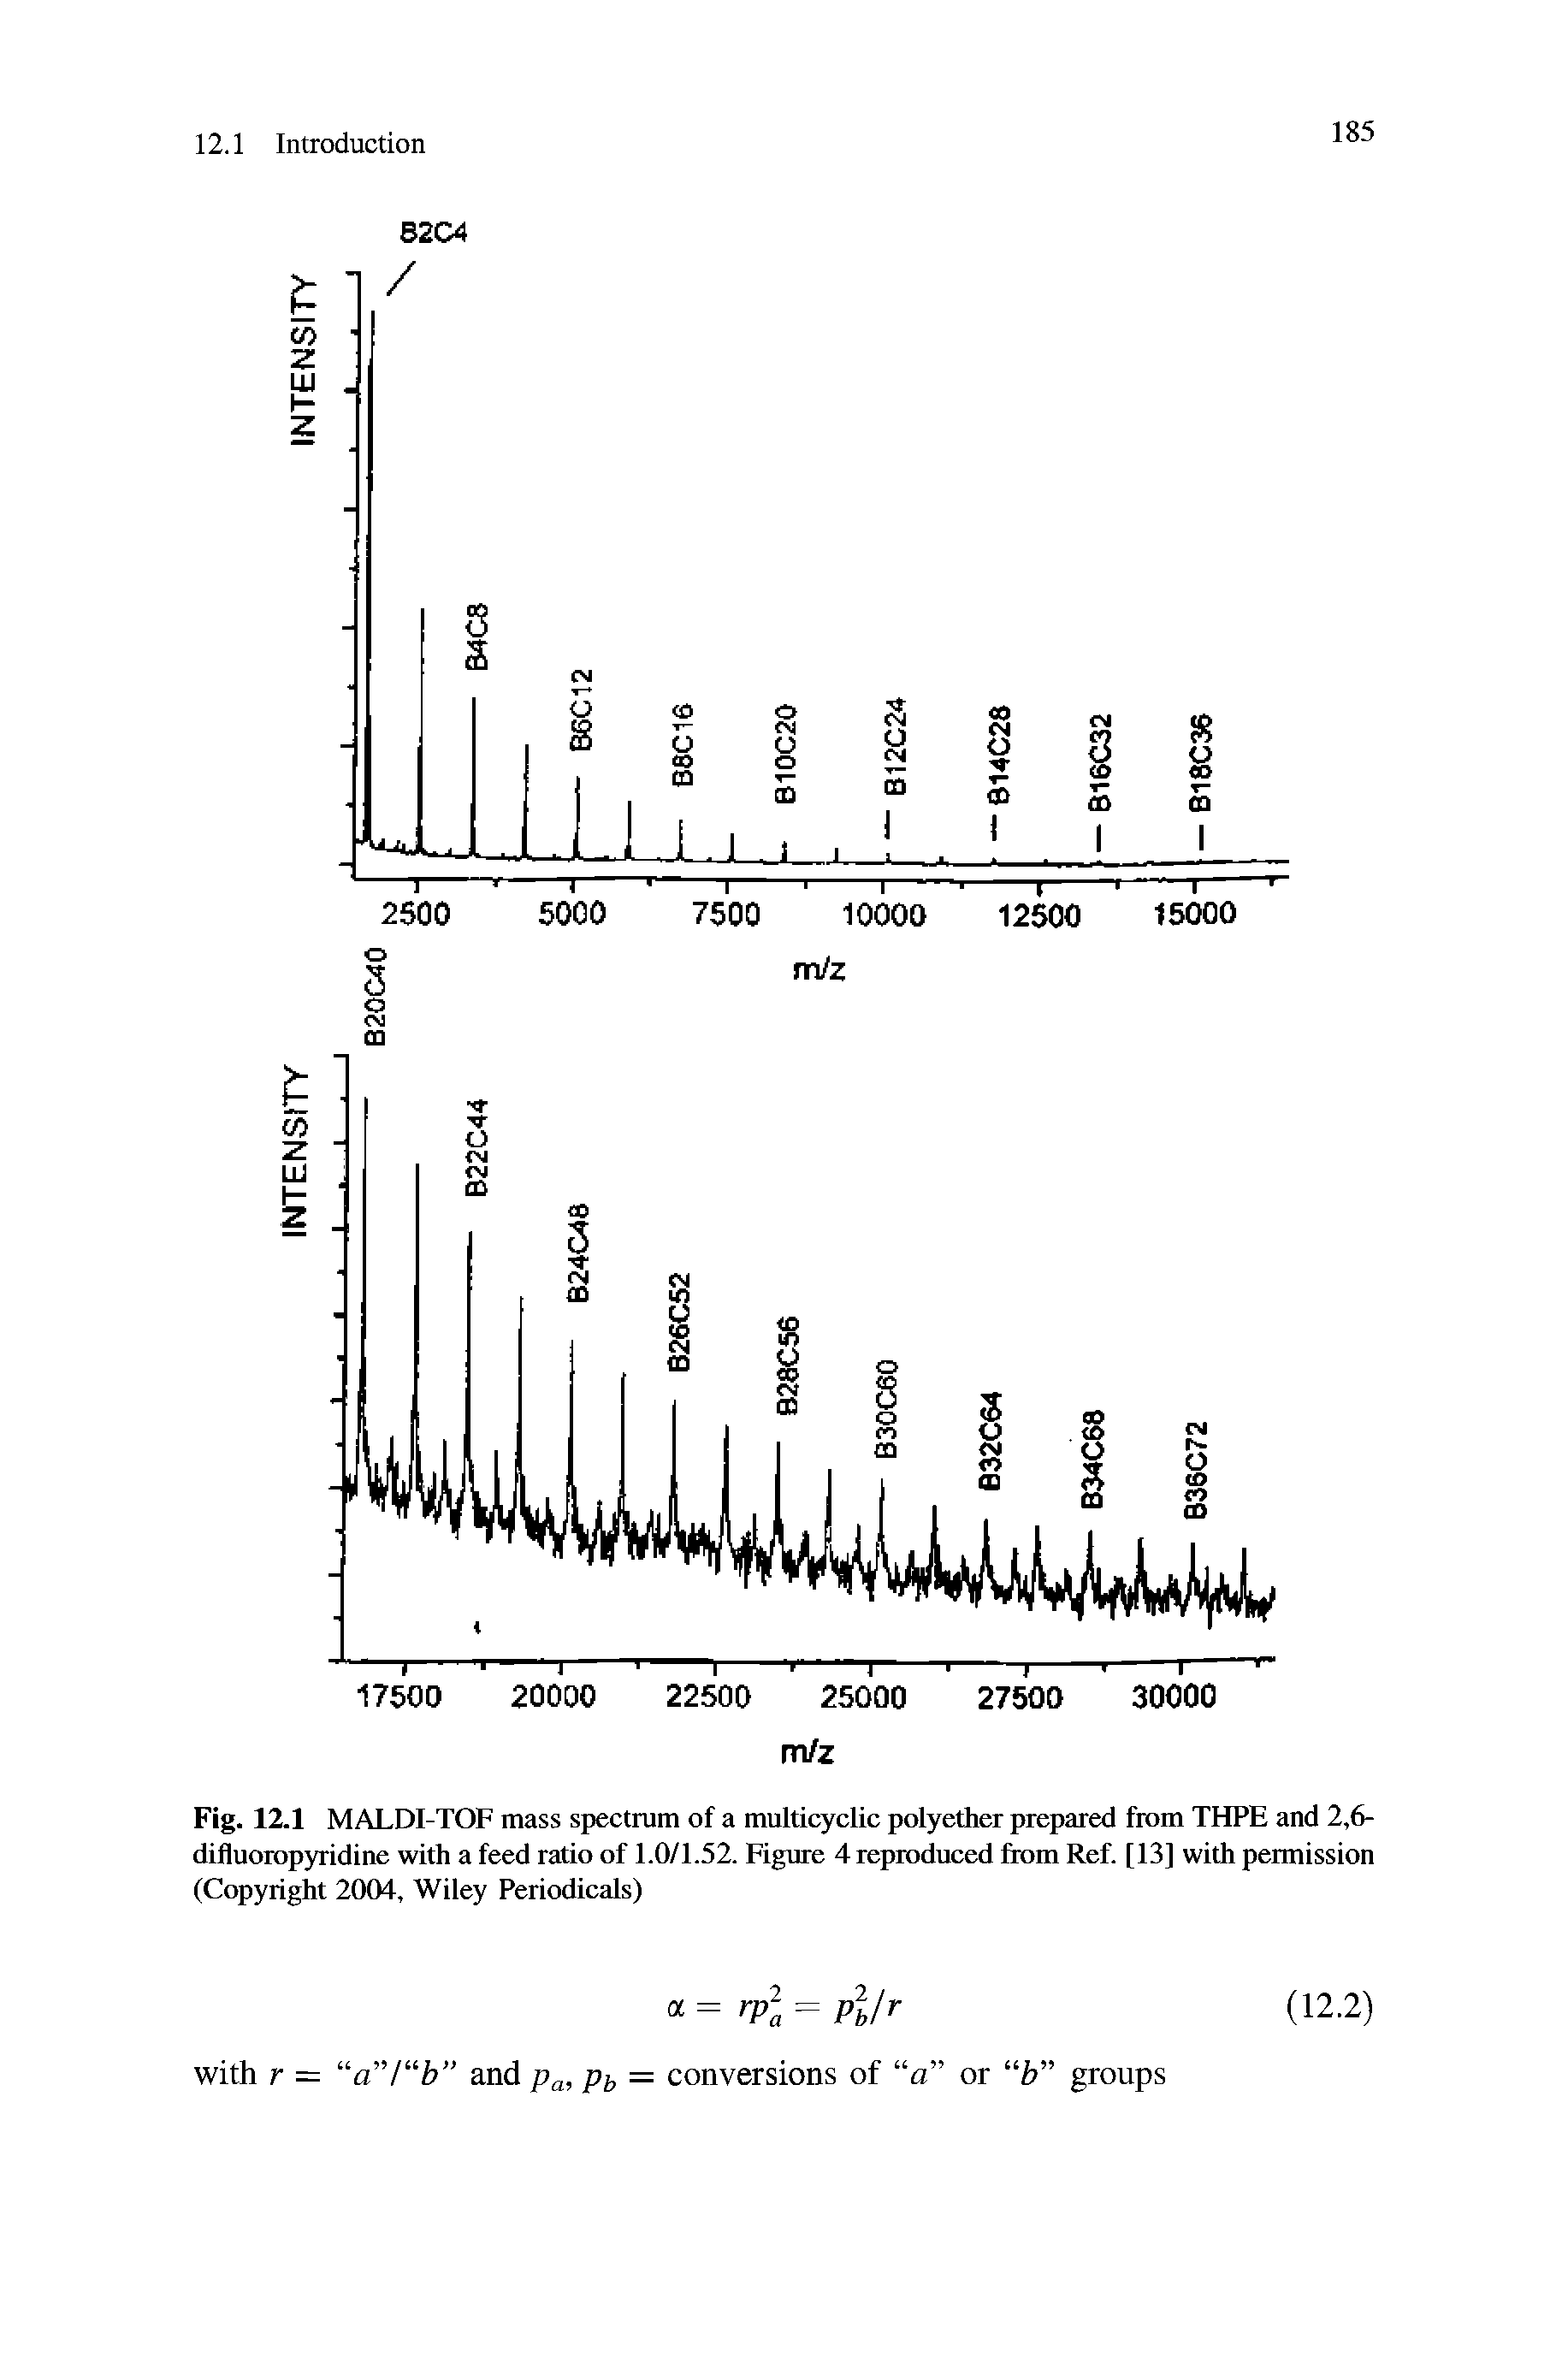 Fig. 12.1 MALDI-TOF mass spectrum of a multicyclic polyether prepared from THPE and 2,6-difluoropyridine with a feed ratio of 1.0/1.52. Figure 4 reproduced from Ref. [13] with permission (Copyright 2004, Wiley Periodicals)...